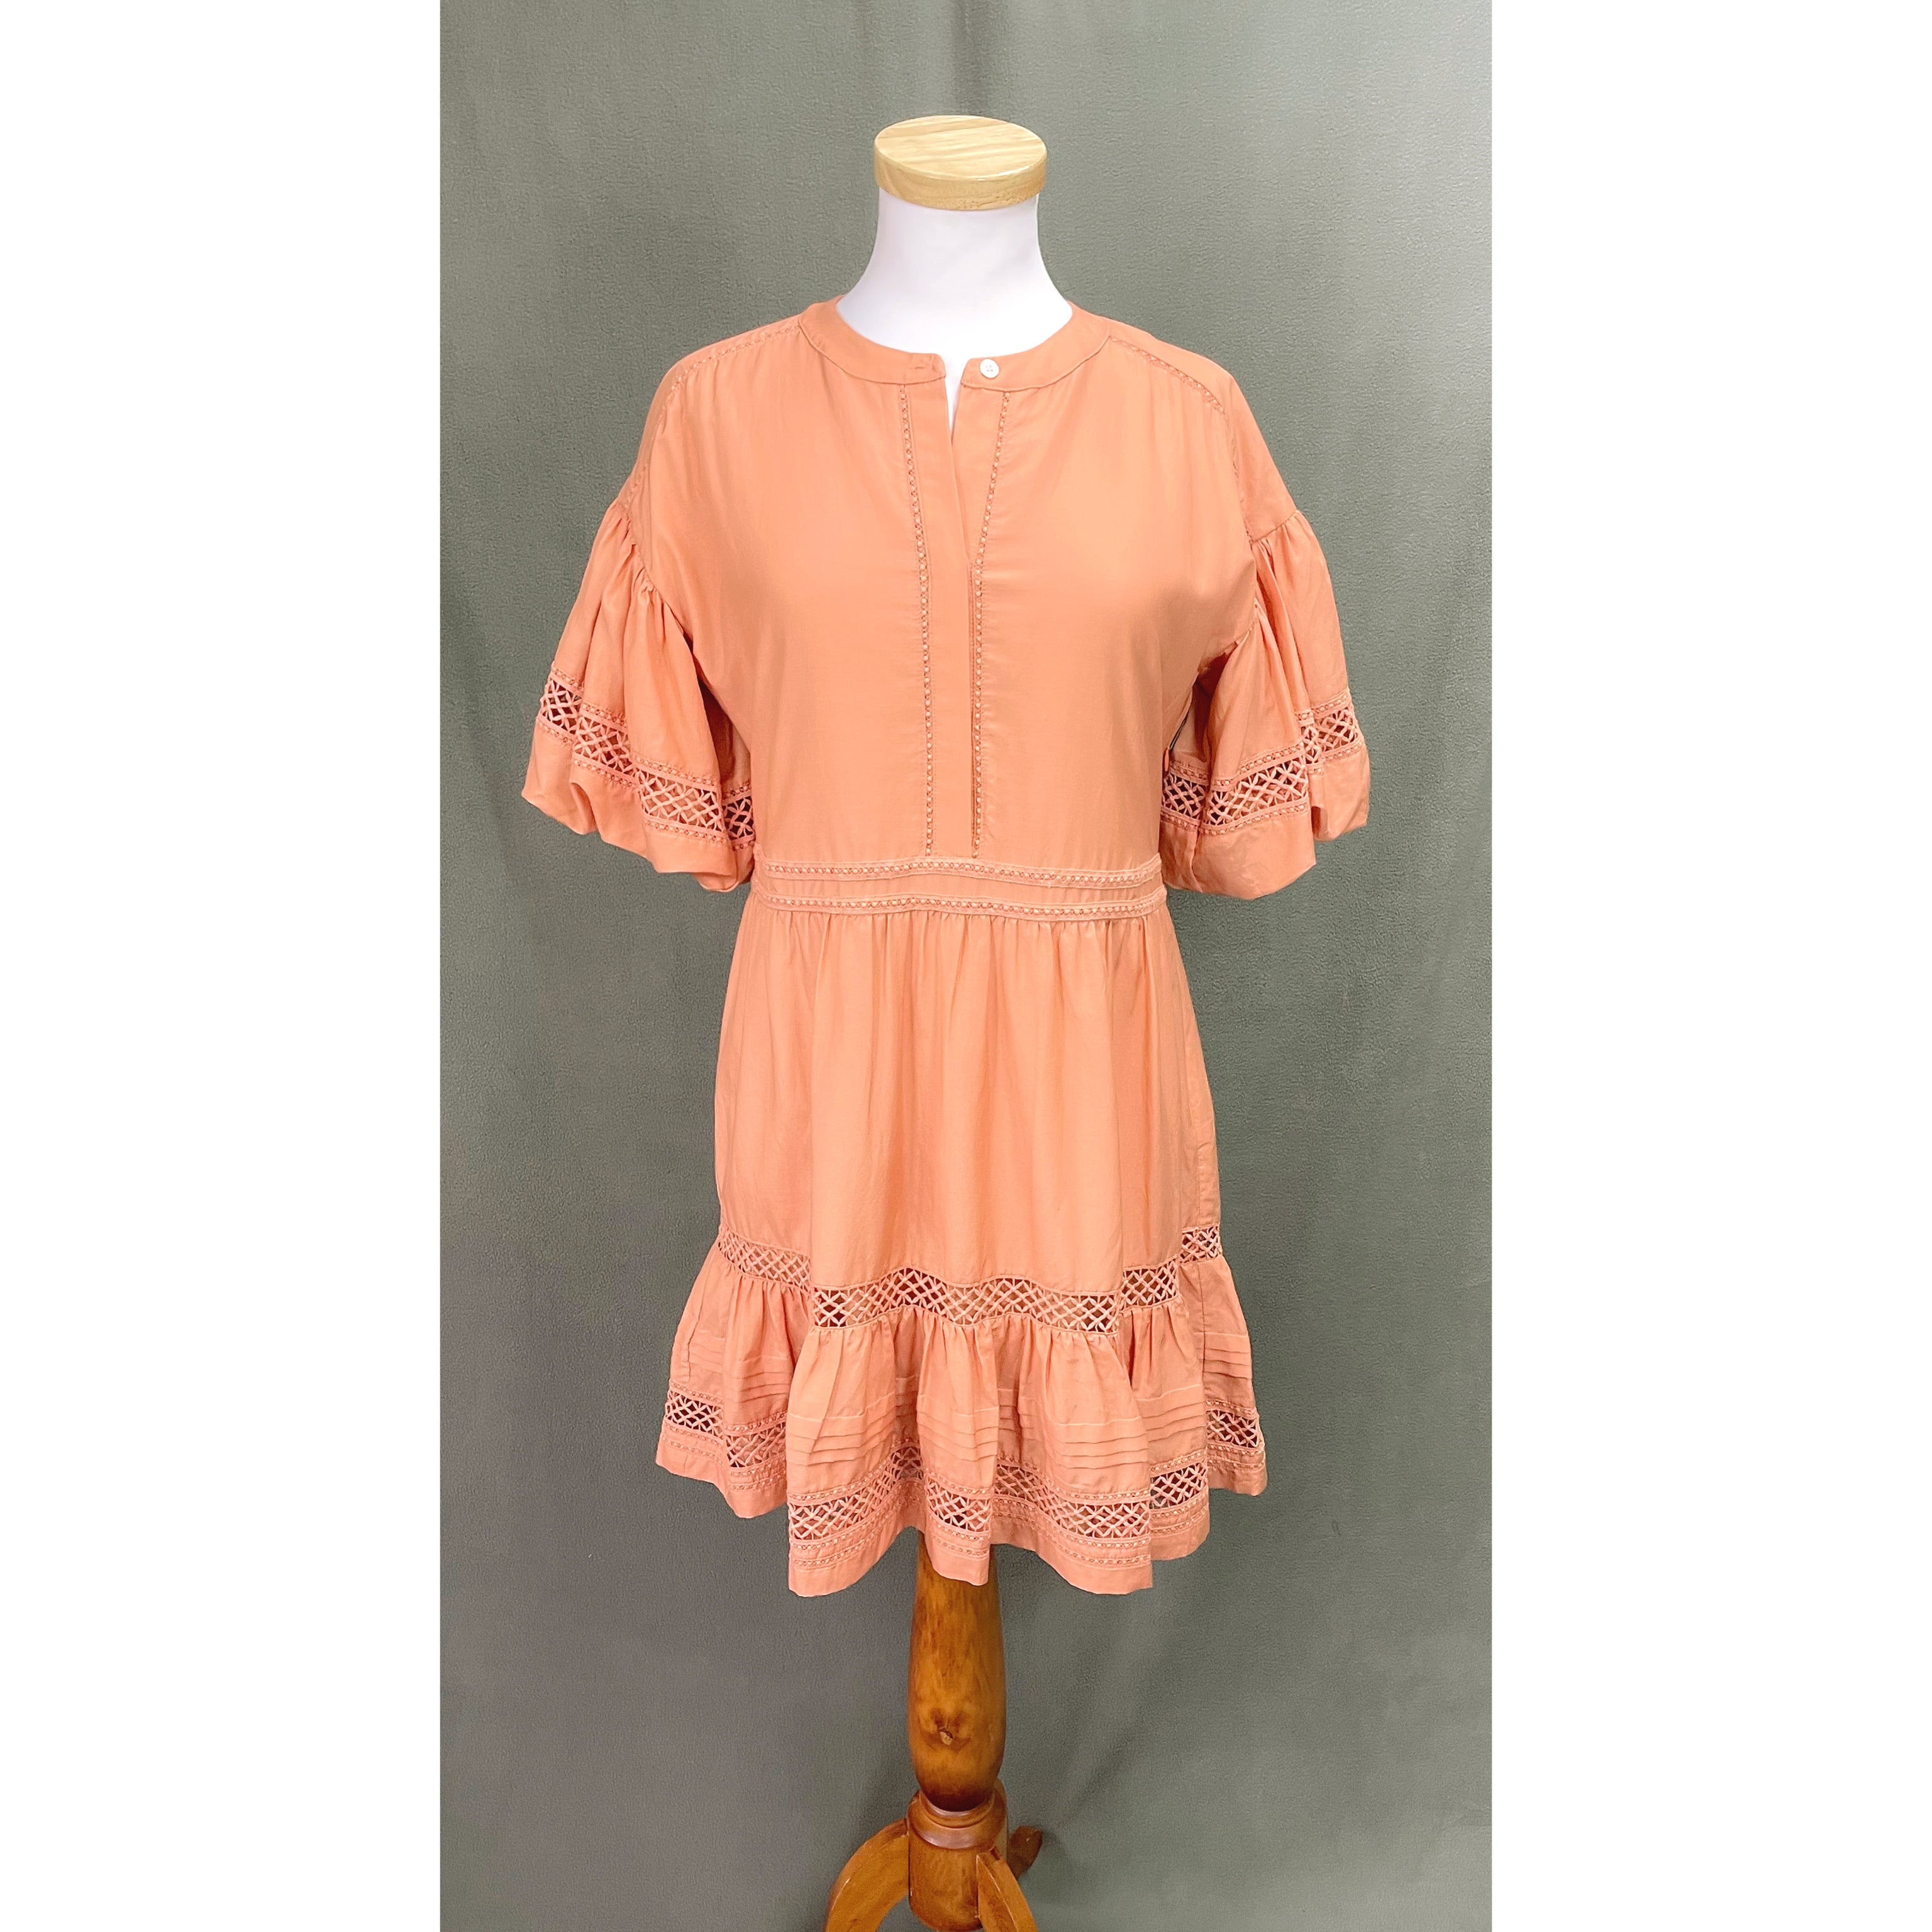 Marie Oliver peach dress, size S, NEW WITH TAGS!